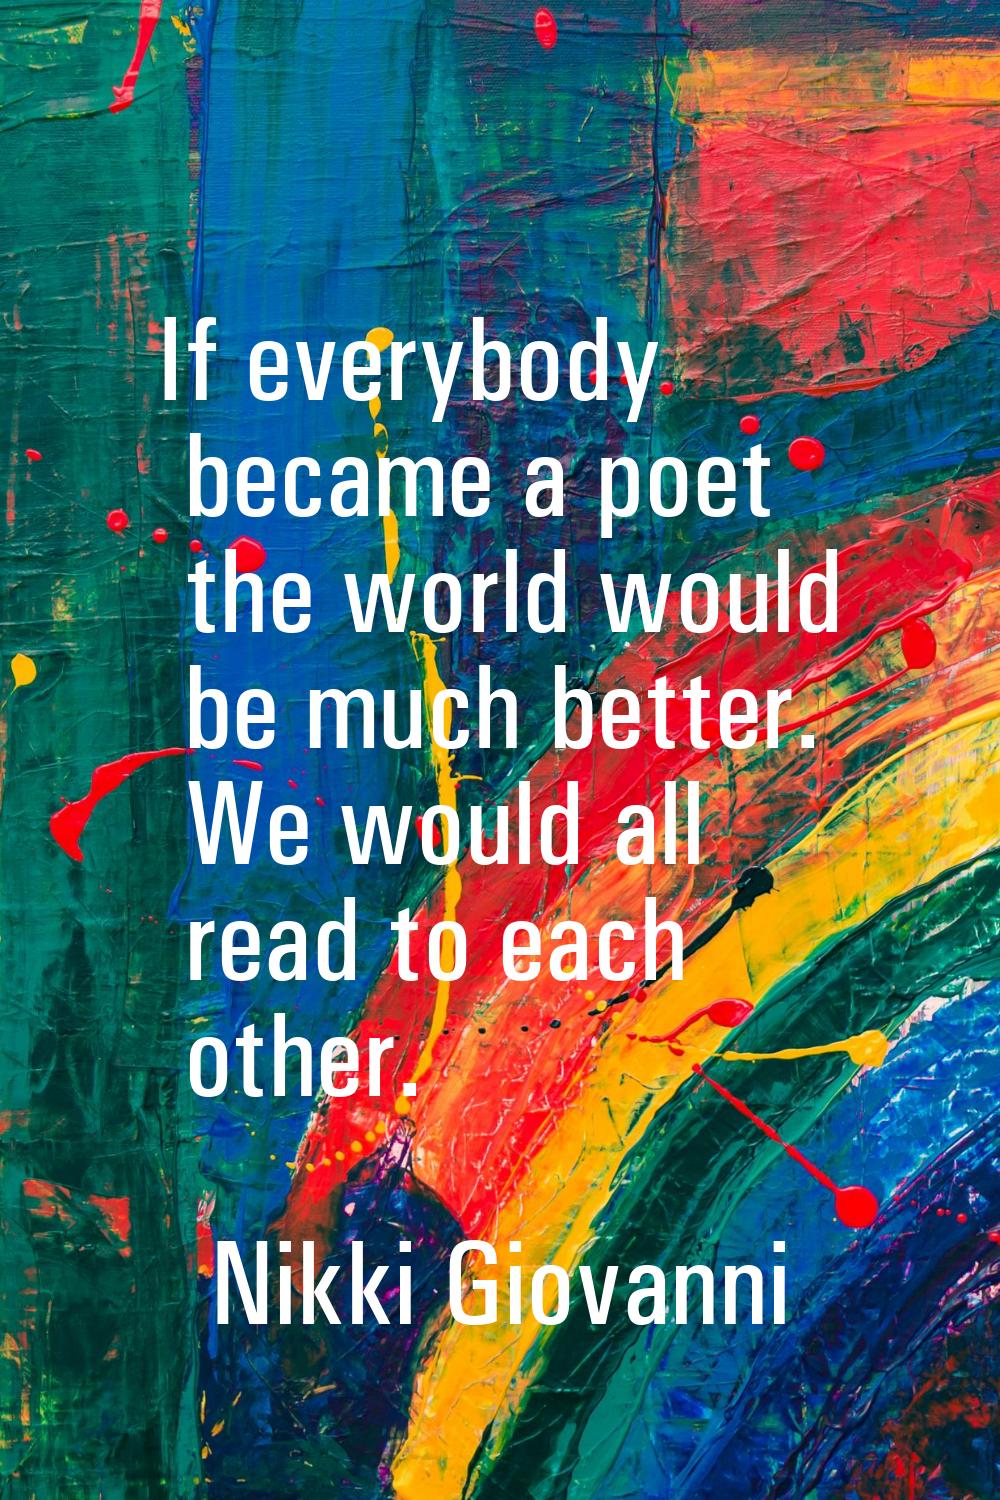 If everybody became a poet the world would be much better. We would all read to each other.